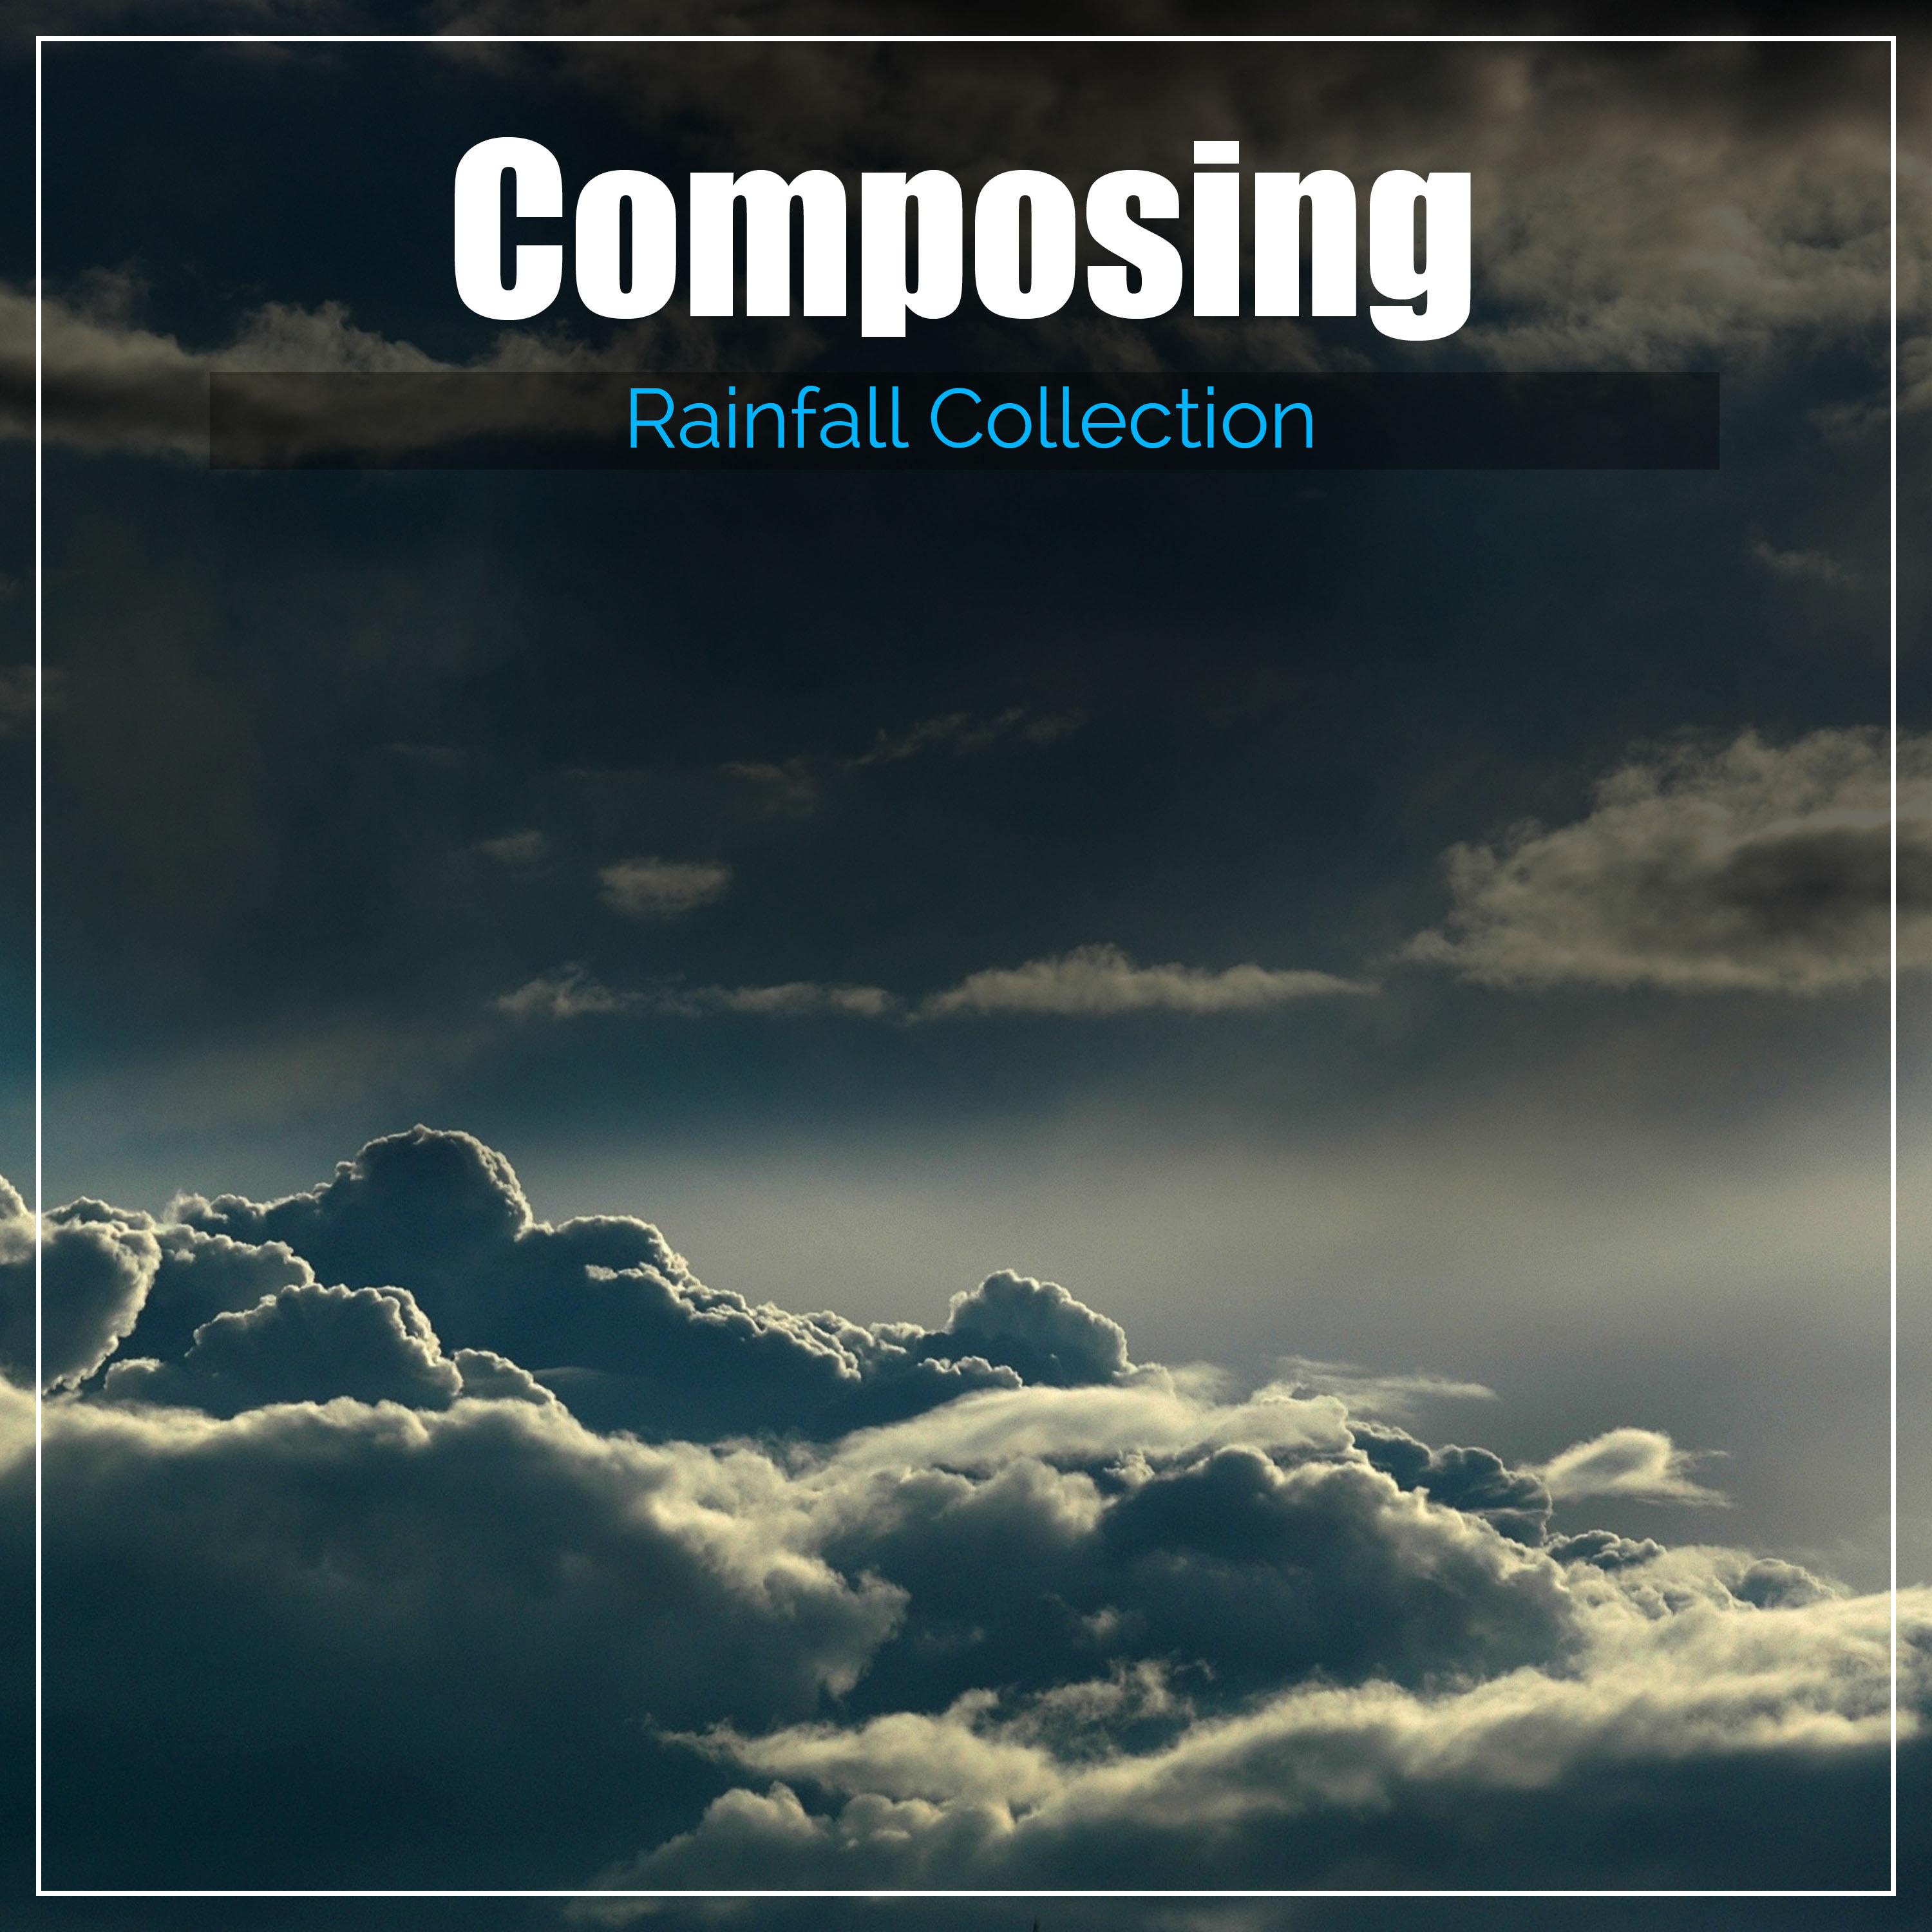 #1 Hour of Composing Rainfall Collection from Nature